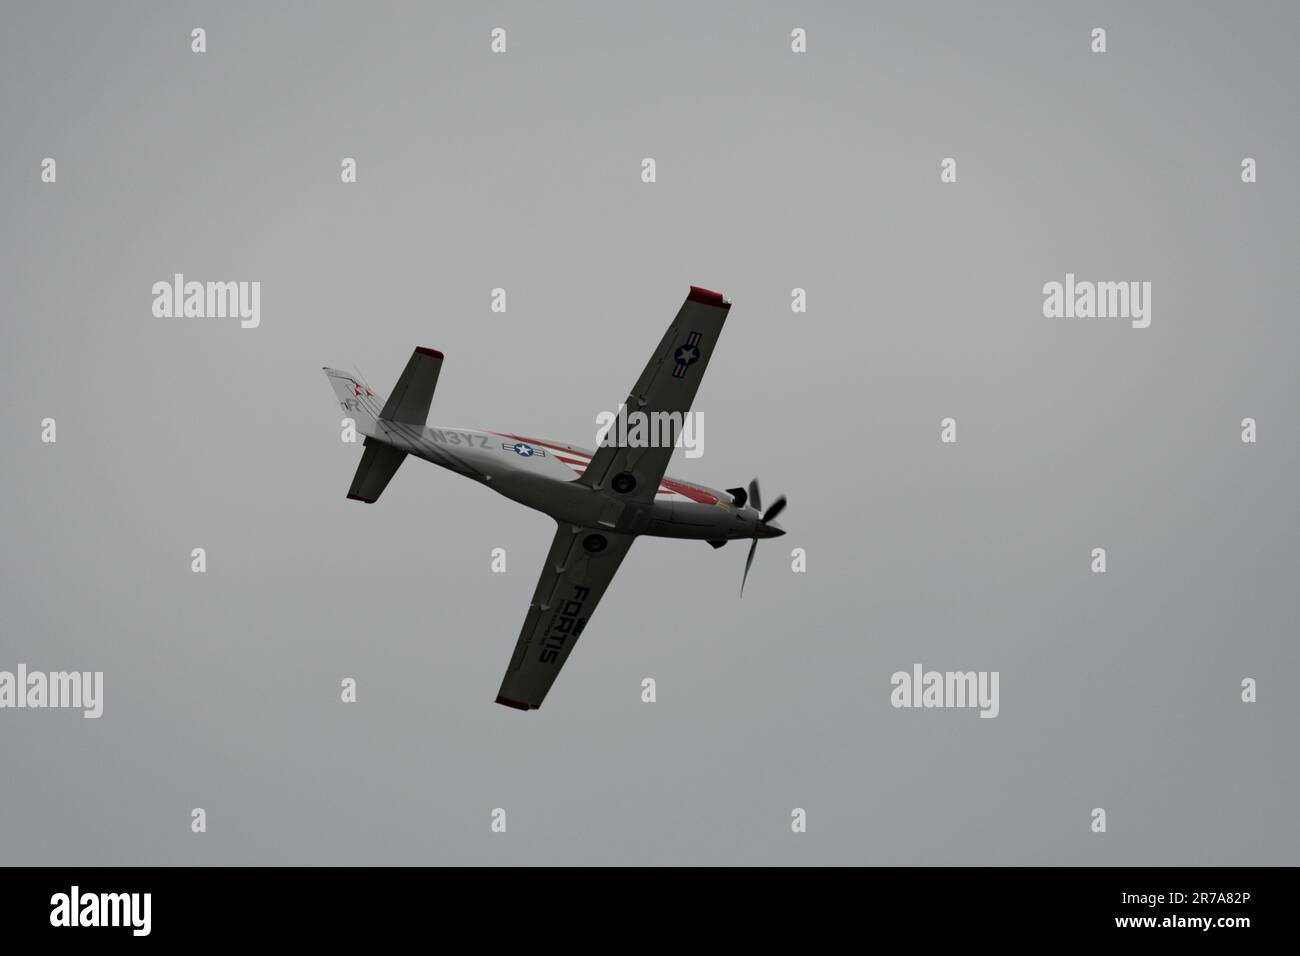 Rhine Valley, Saint Gallen, Switzerland, May 20, 2023 N-3YZ Amateur turbine legend propeller airplane performance during an air show seen from the top Stock Photo